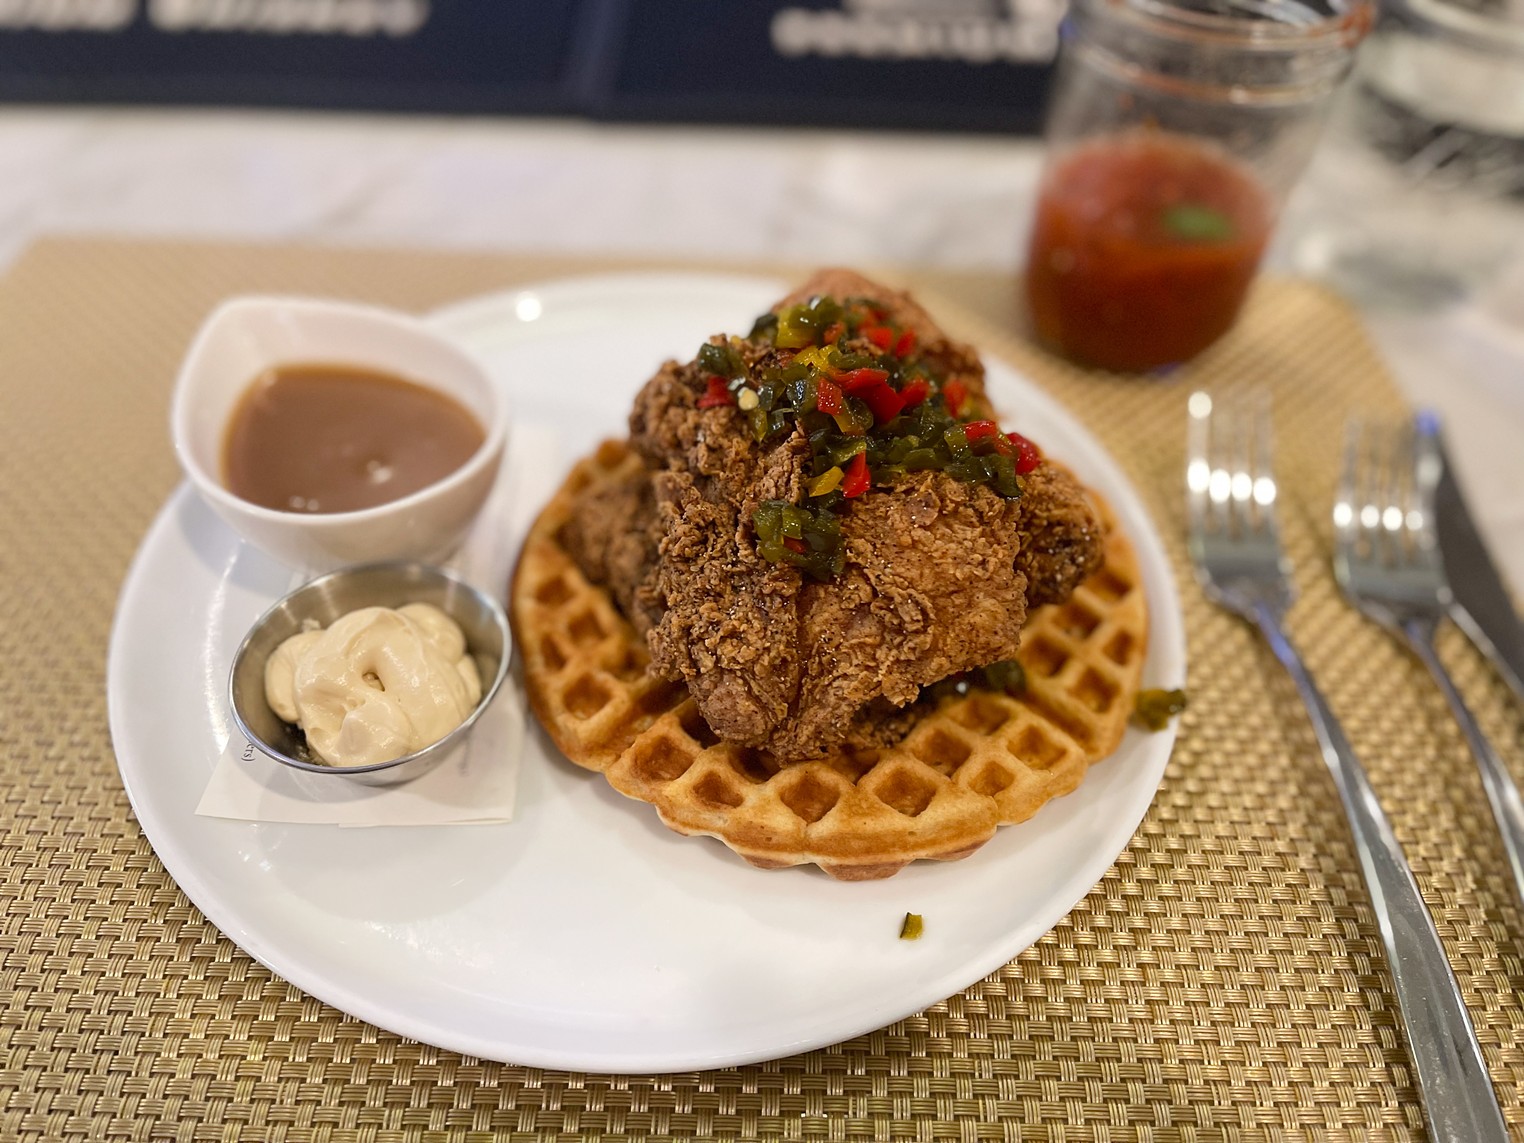 Restaurant Beatrice: From Authentic Seafood Boils to Sinfully Indulgent Chicken and Waffles